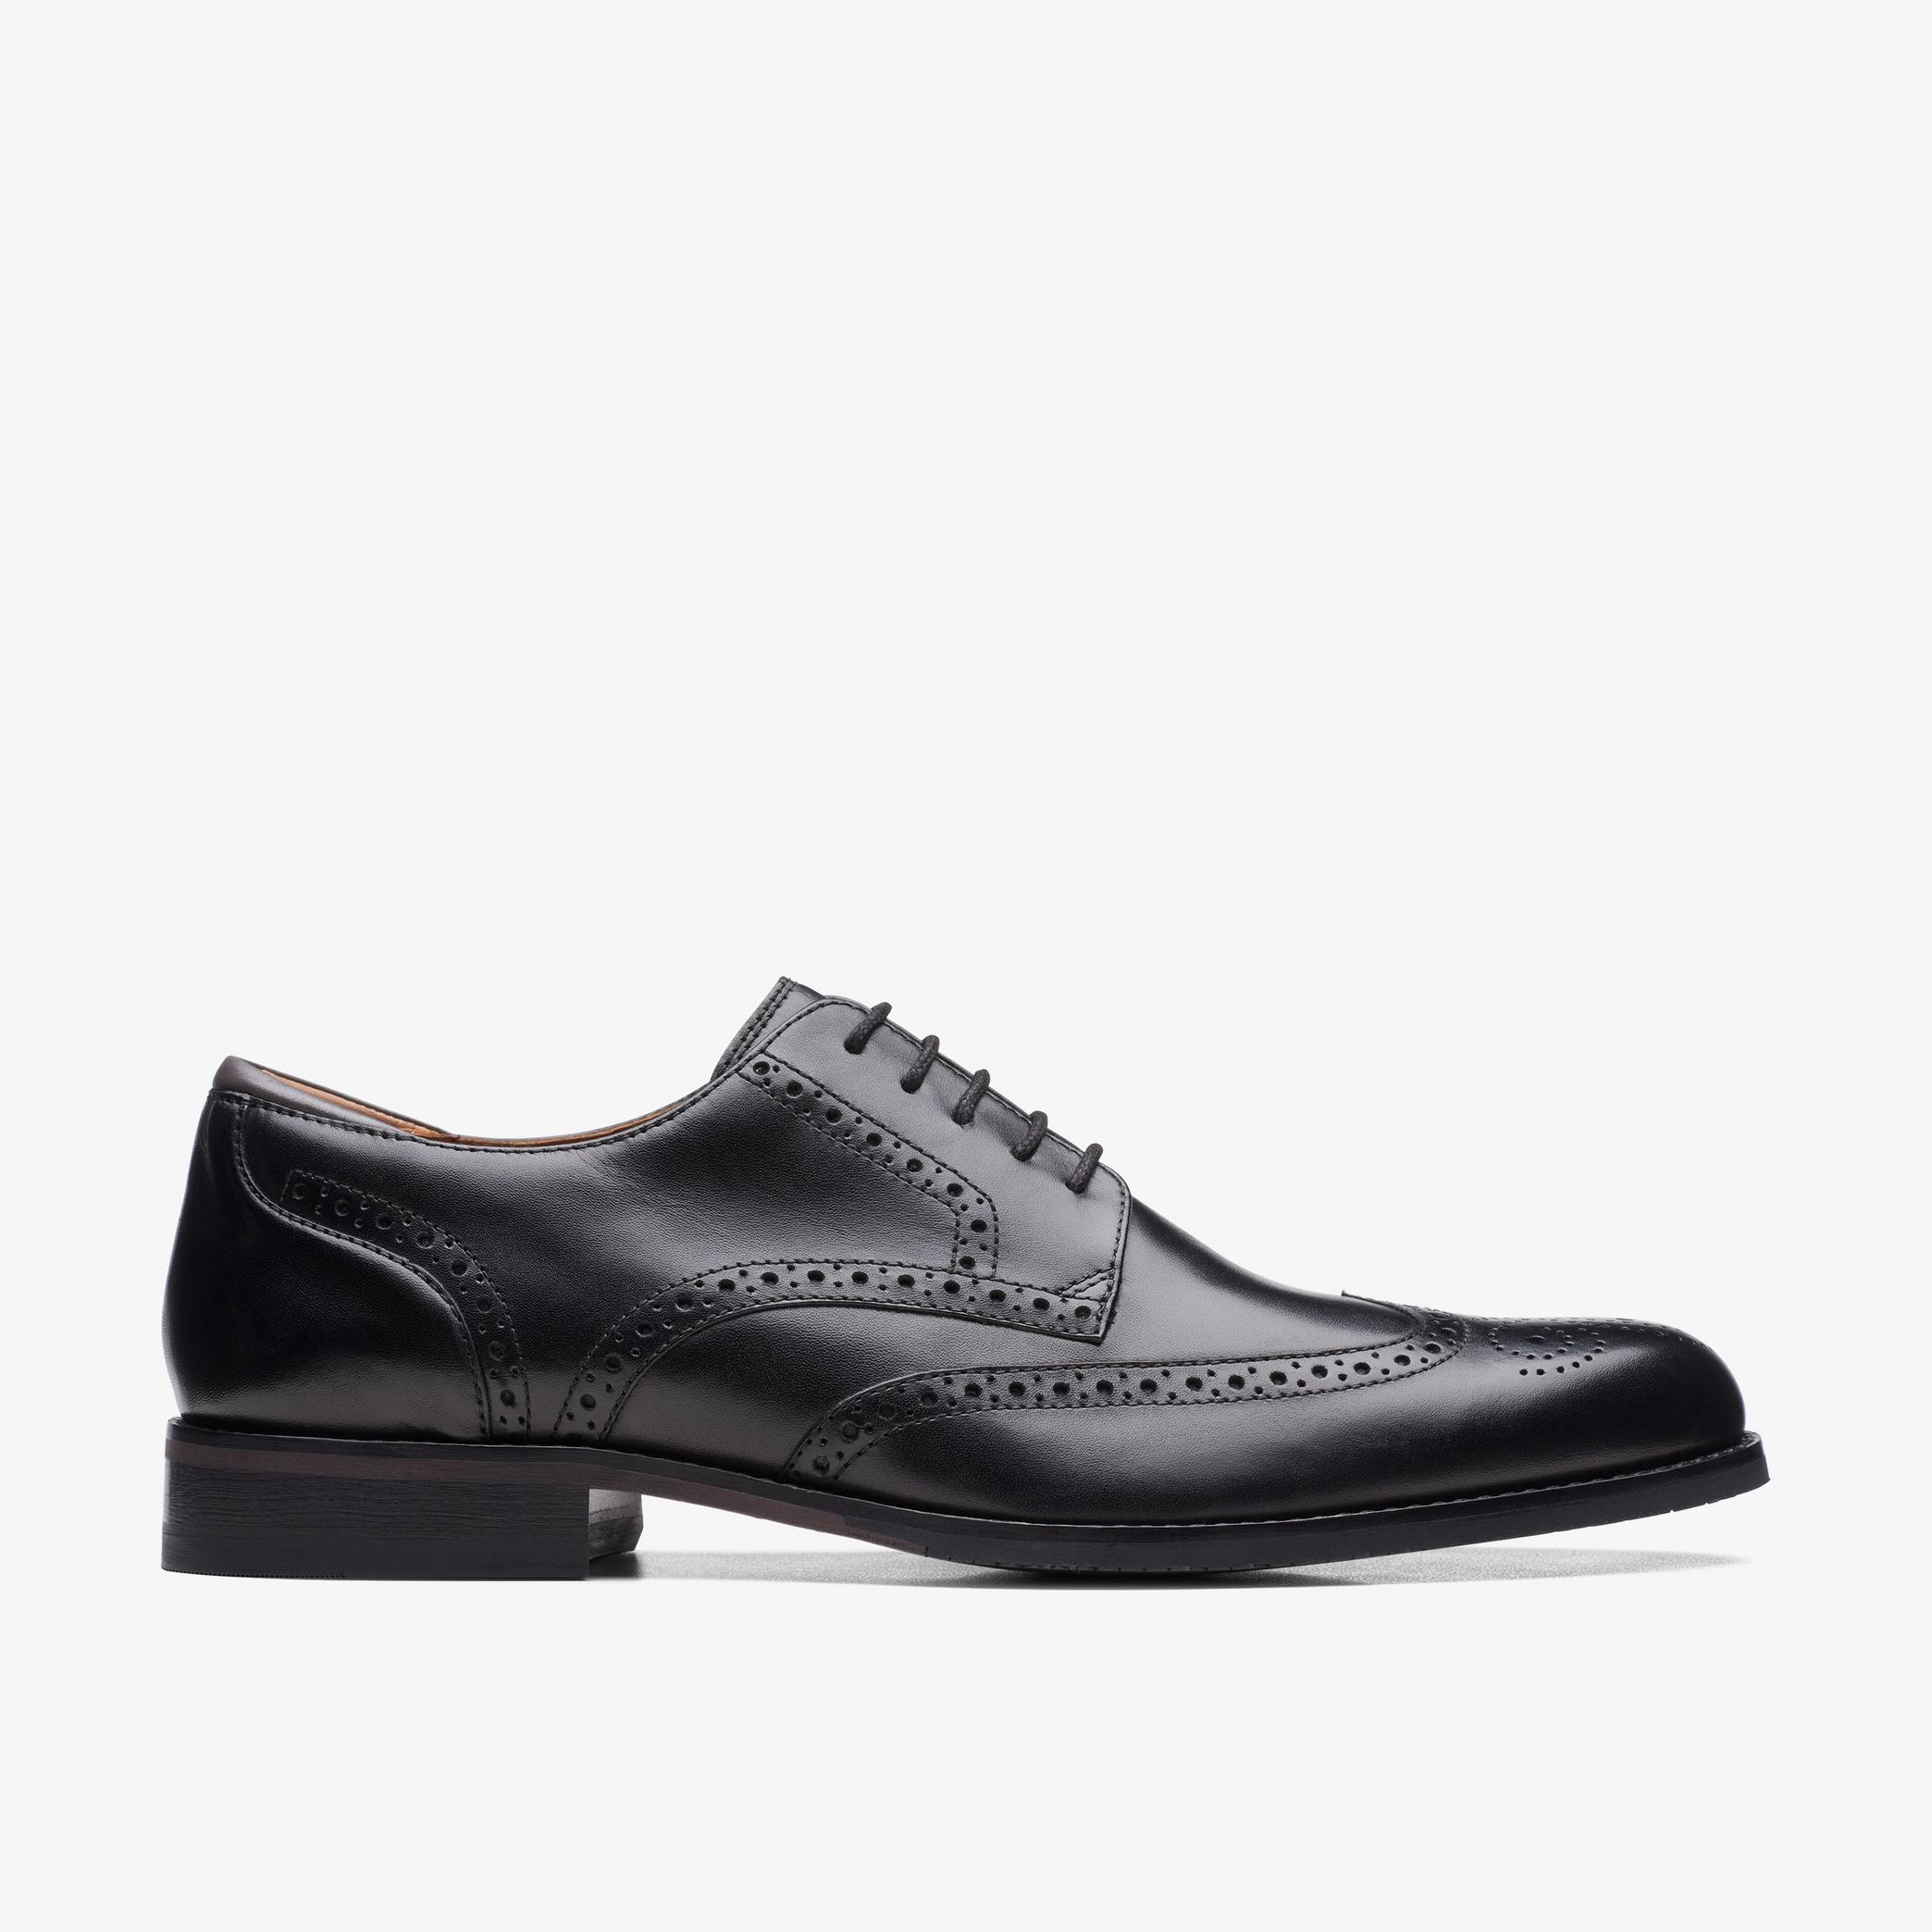 Craft Arlo Limit Black Leather Oxford Shoes, view 1 of 6